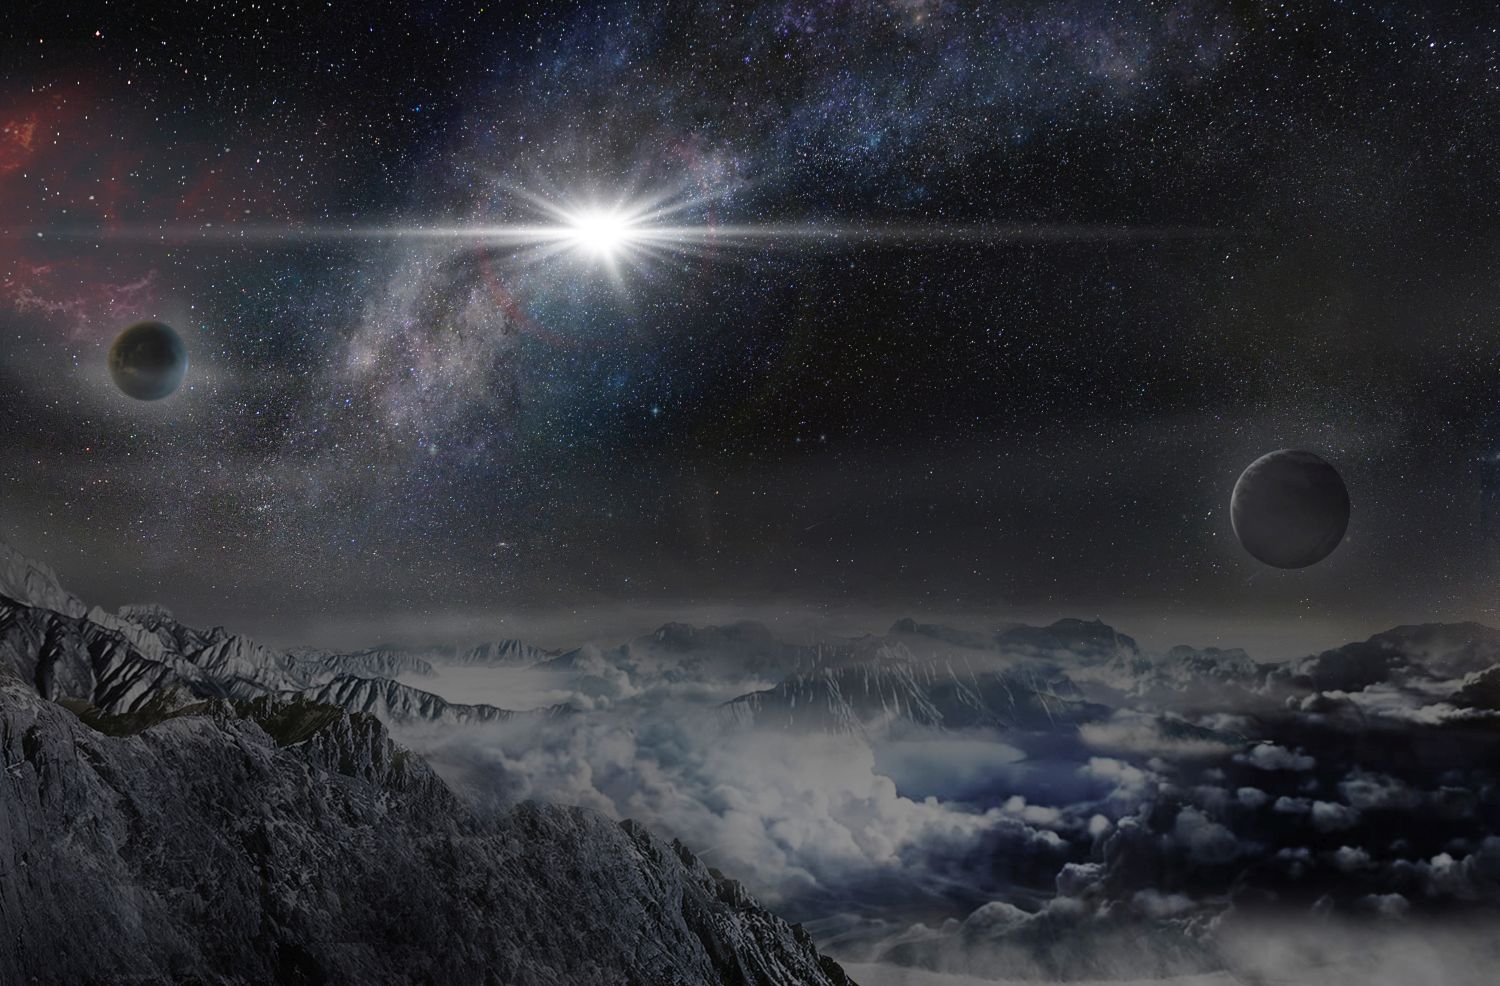 An artist's impression of the record-breakingly powerful, superluminous supernova ASASSN-15lh that was recently discovered by the Automated Survey for SuperNovae (ASAS-SN), as it would appear from a hypothetical exoplanet located about 10,000 light years away in the host galaxy of the hypernova. (Image Credit: Beijing Planetarium / Jin Ma) 